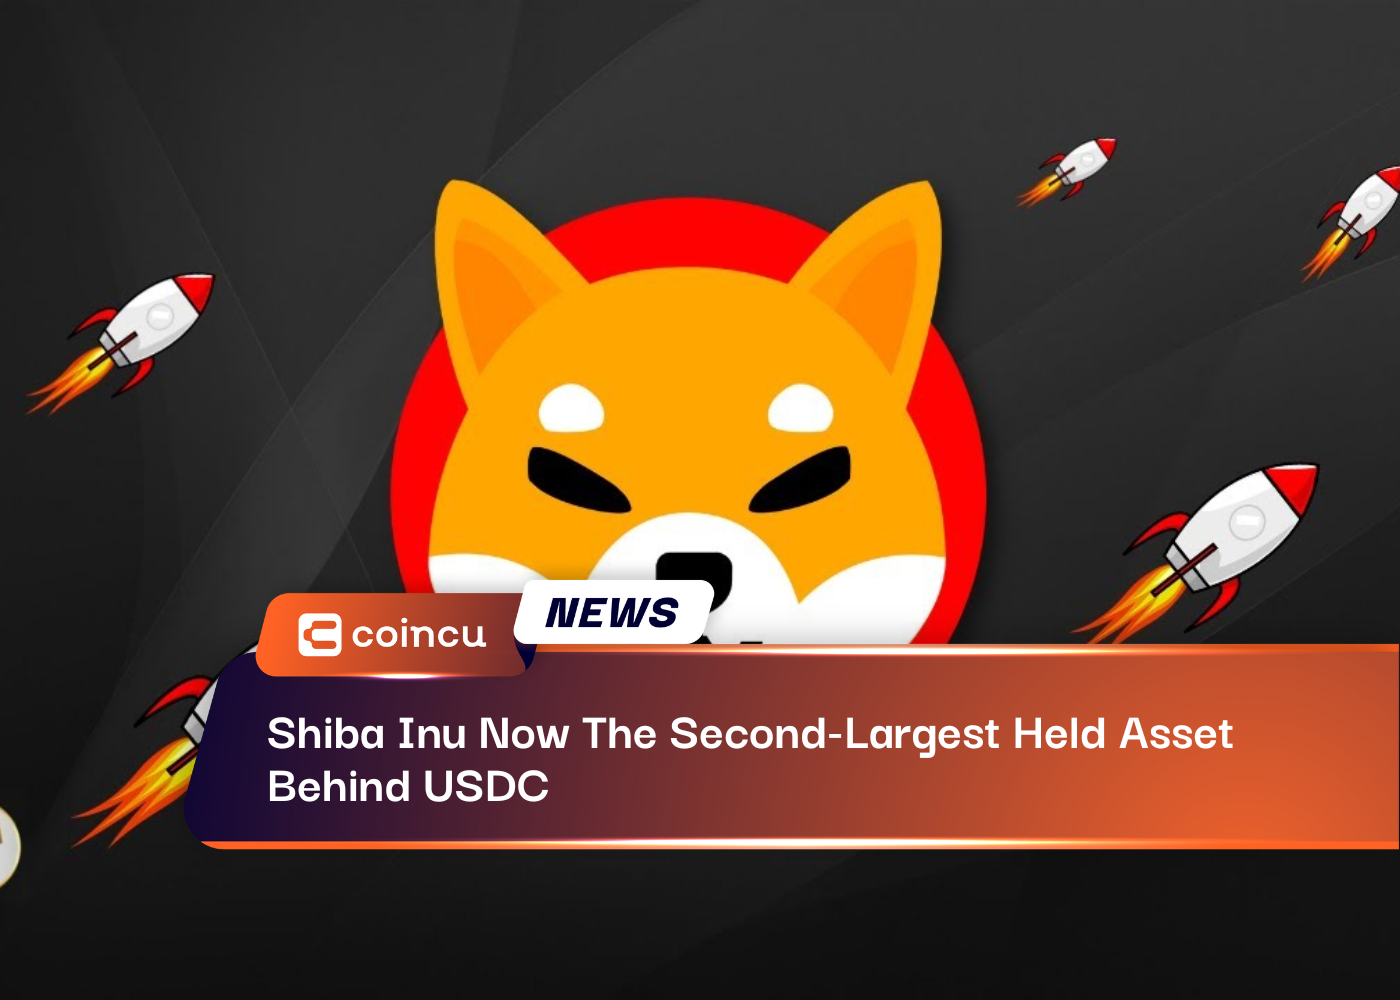 Shiba Inu Now The Second-Largest Held Asset Behind USDC